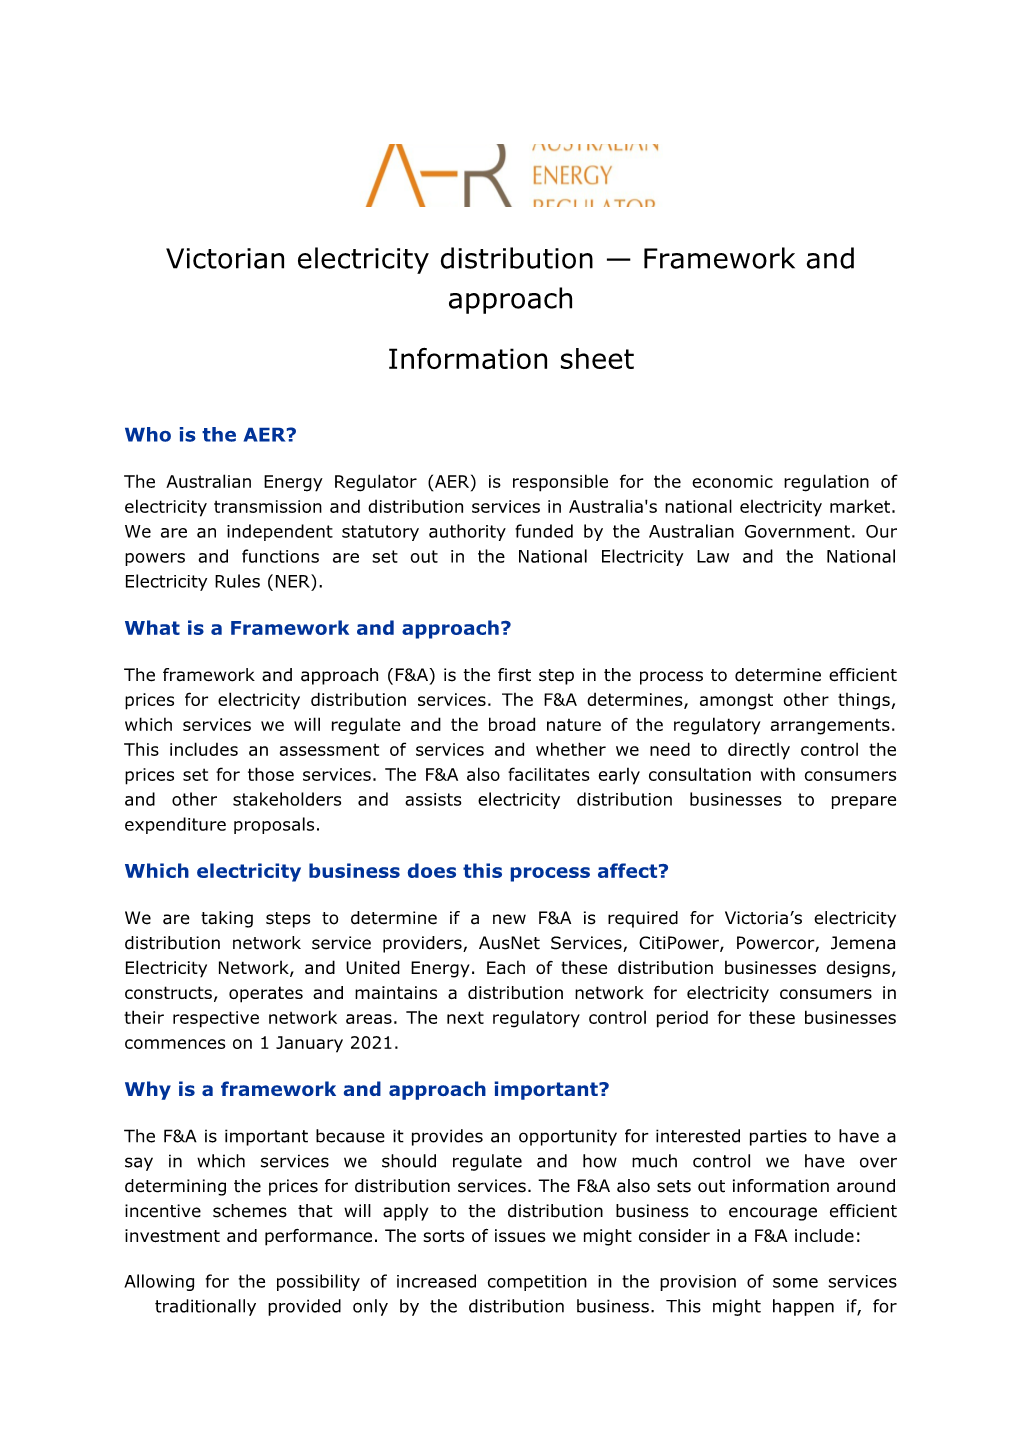 Victorian Electricity Distribution Framework and Approach